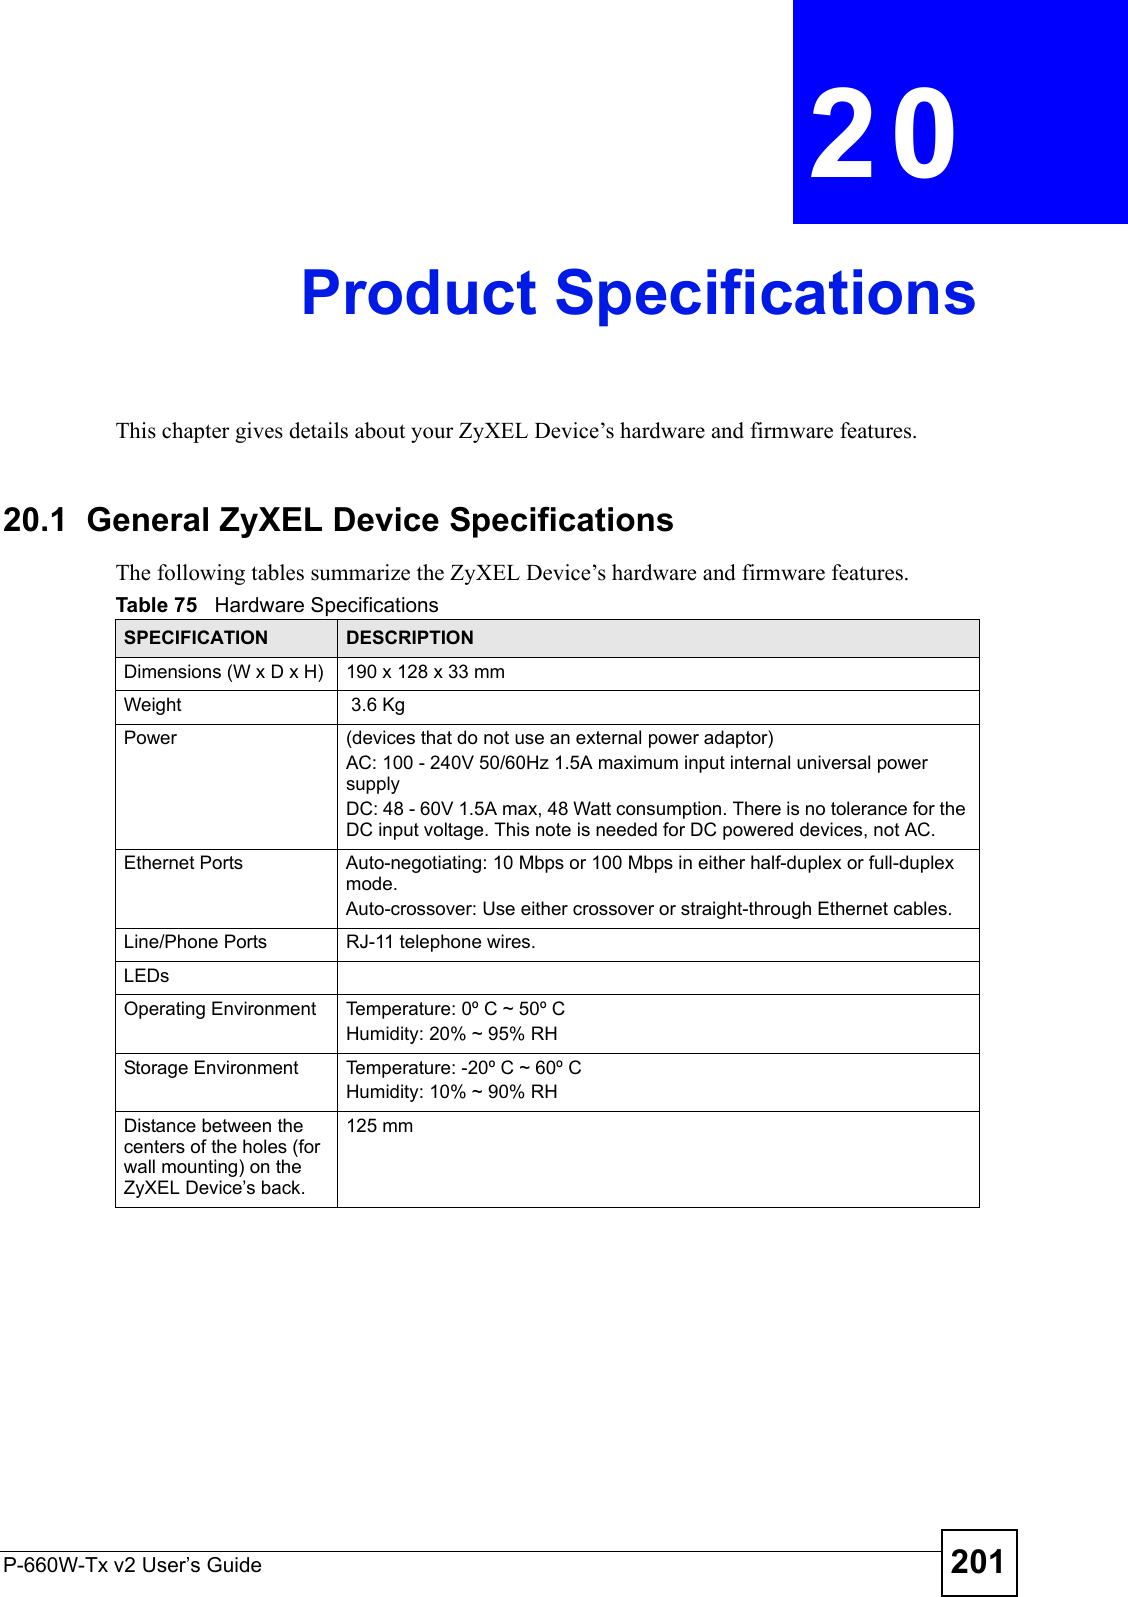 P-660W-Tx v2 User’s Guide 201CHAPTER  20 Product SpecificationsThis chapter gives details about your ZyXEL Device’s hardware and firmware features.20.1  General ZyXEL Device SpecificationsThe following tables summarize the ZyXEL Device’s hardware and firmware features.Table 75   Hardware SpecificationsSPECIFICATION DESCRIPTIONDimensions (W x D x H)  190 x 128 x 33 mmWeight  3.6 KgPower (devices that do not use an external power adaptor)AC: 100 - 240V 50/60Hz 1.5A maximum input internal universal power supply DC: 48 - 60V 1.5A max, 48 Watt consumption. There is no tolerance for the DC input voltage. This note is needed for DC powered devices, not AC.Ethernet Ports Auto-negotiating: 10 Mbps or 100 Mbps in either half-duplex or full-duplex mode.Auto-crossover: Use either crossover or straight-through Ethernet cables.Line/Phone Ports RJ-11 telephone wires.LEDsOperating Environment  Temperature: 0º C ~ 50º C Humidity: 20% ~ 95% RHStorage Environment  Temperature: -20º C ~ 60º CHumidity: 10% ~ 90% RHDistance between the centers of the holes (for wall mounting) on the ZyXEL Device’s back.125 mm